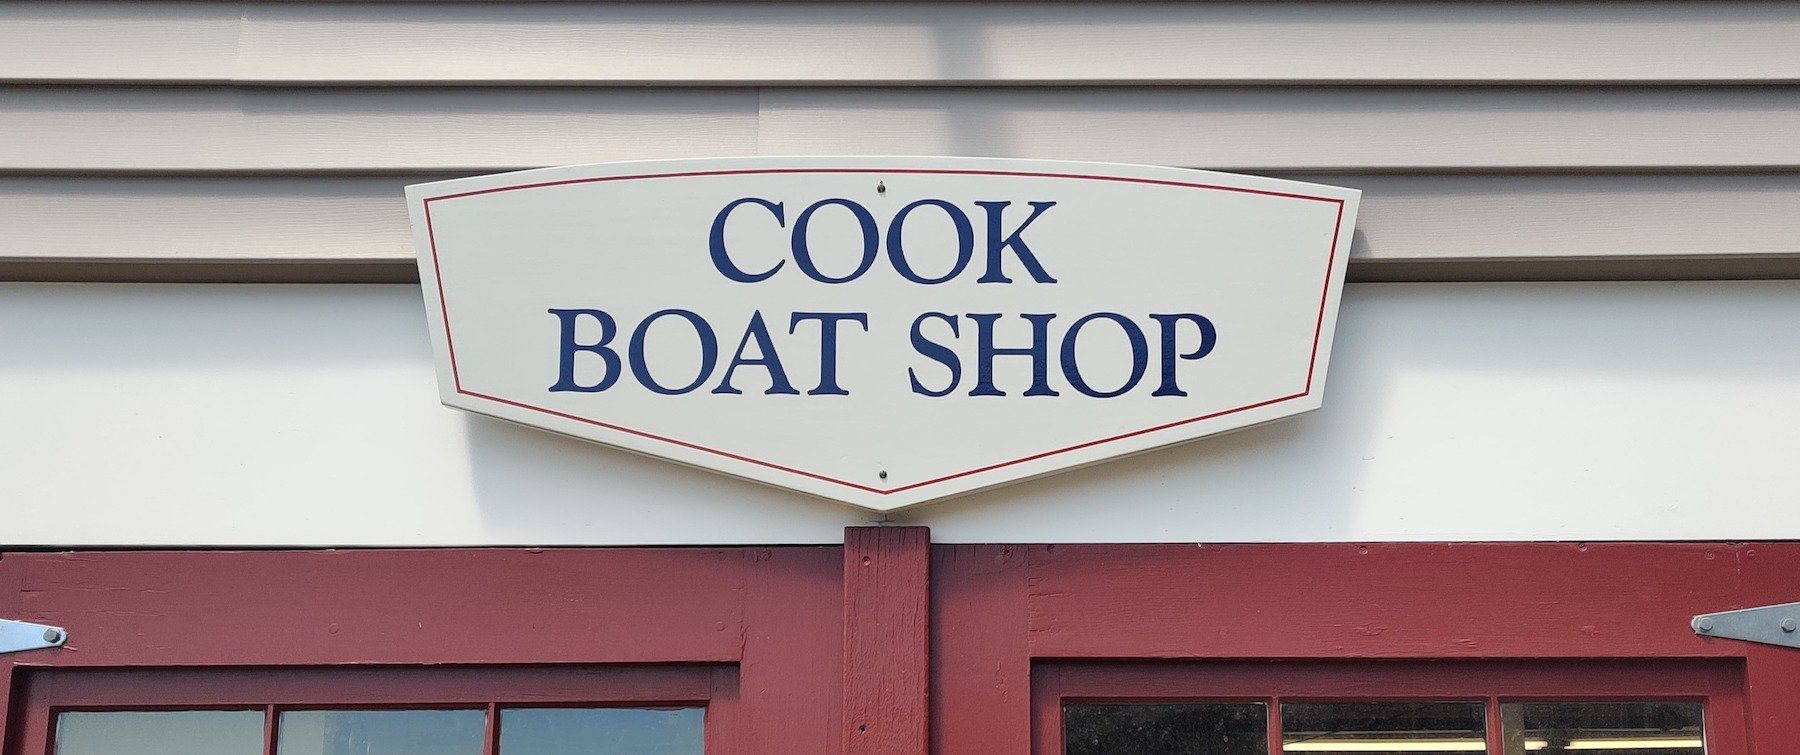  Our working wood boat shop hosts a variety of wood boat workshops throughout the year.    Visitors can see small boats being built and restored as well as learn about the various wood working and boat building techniques. &nbsp; 